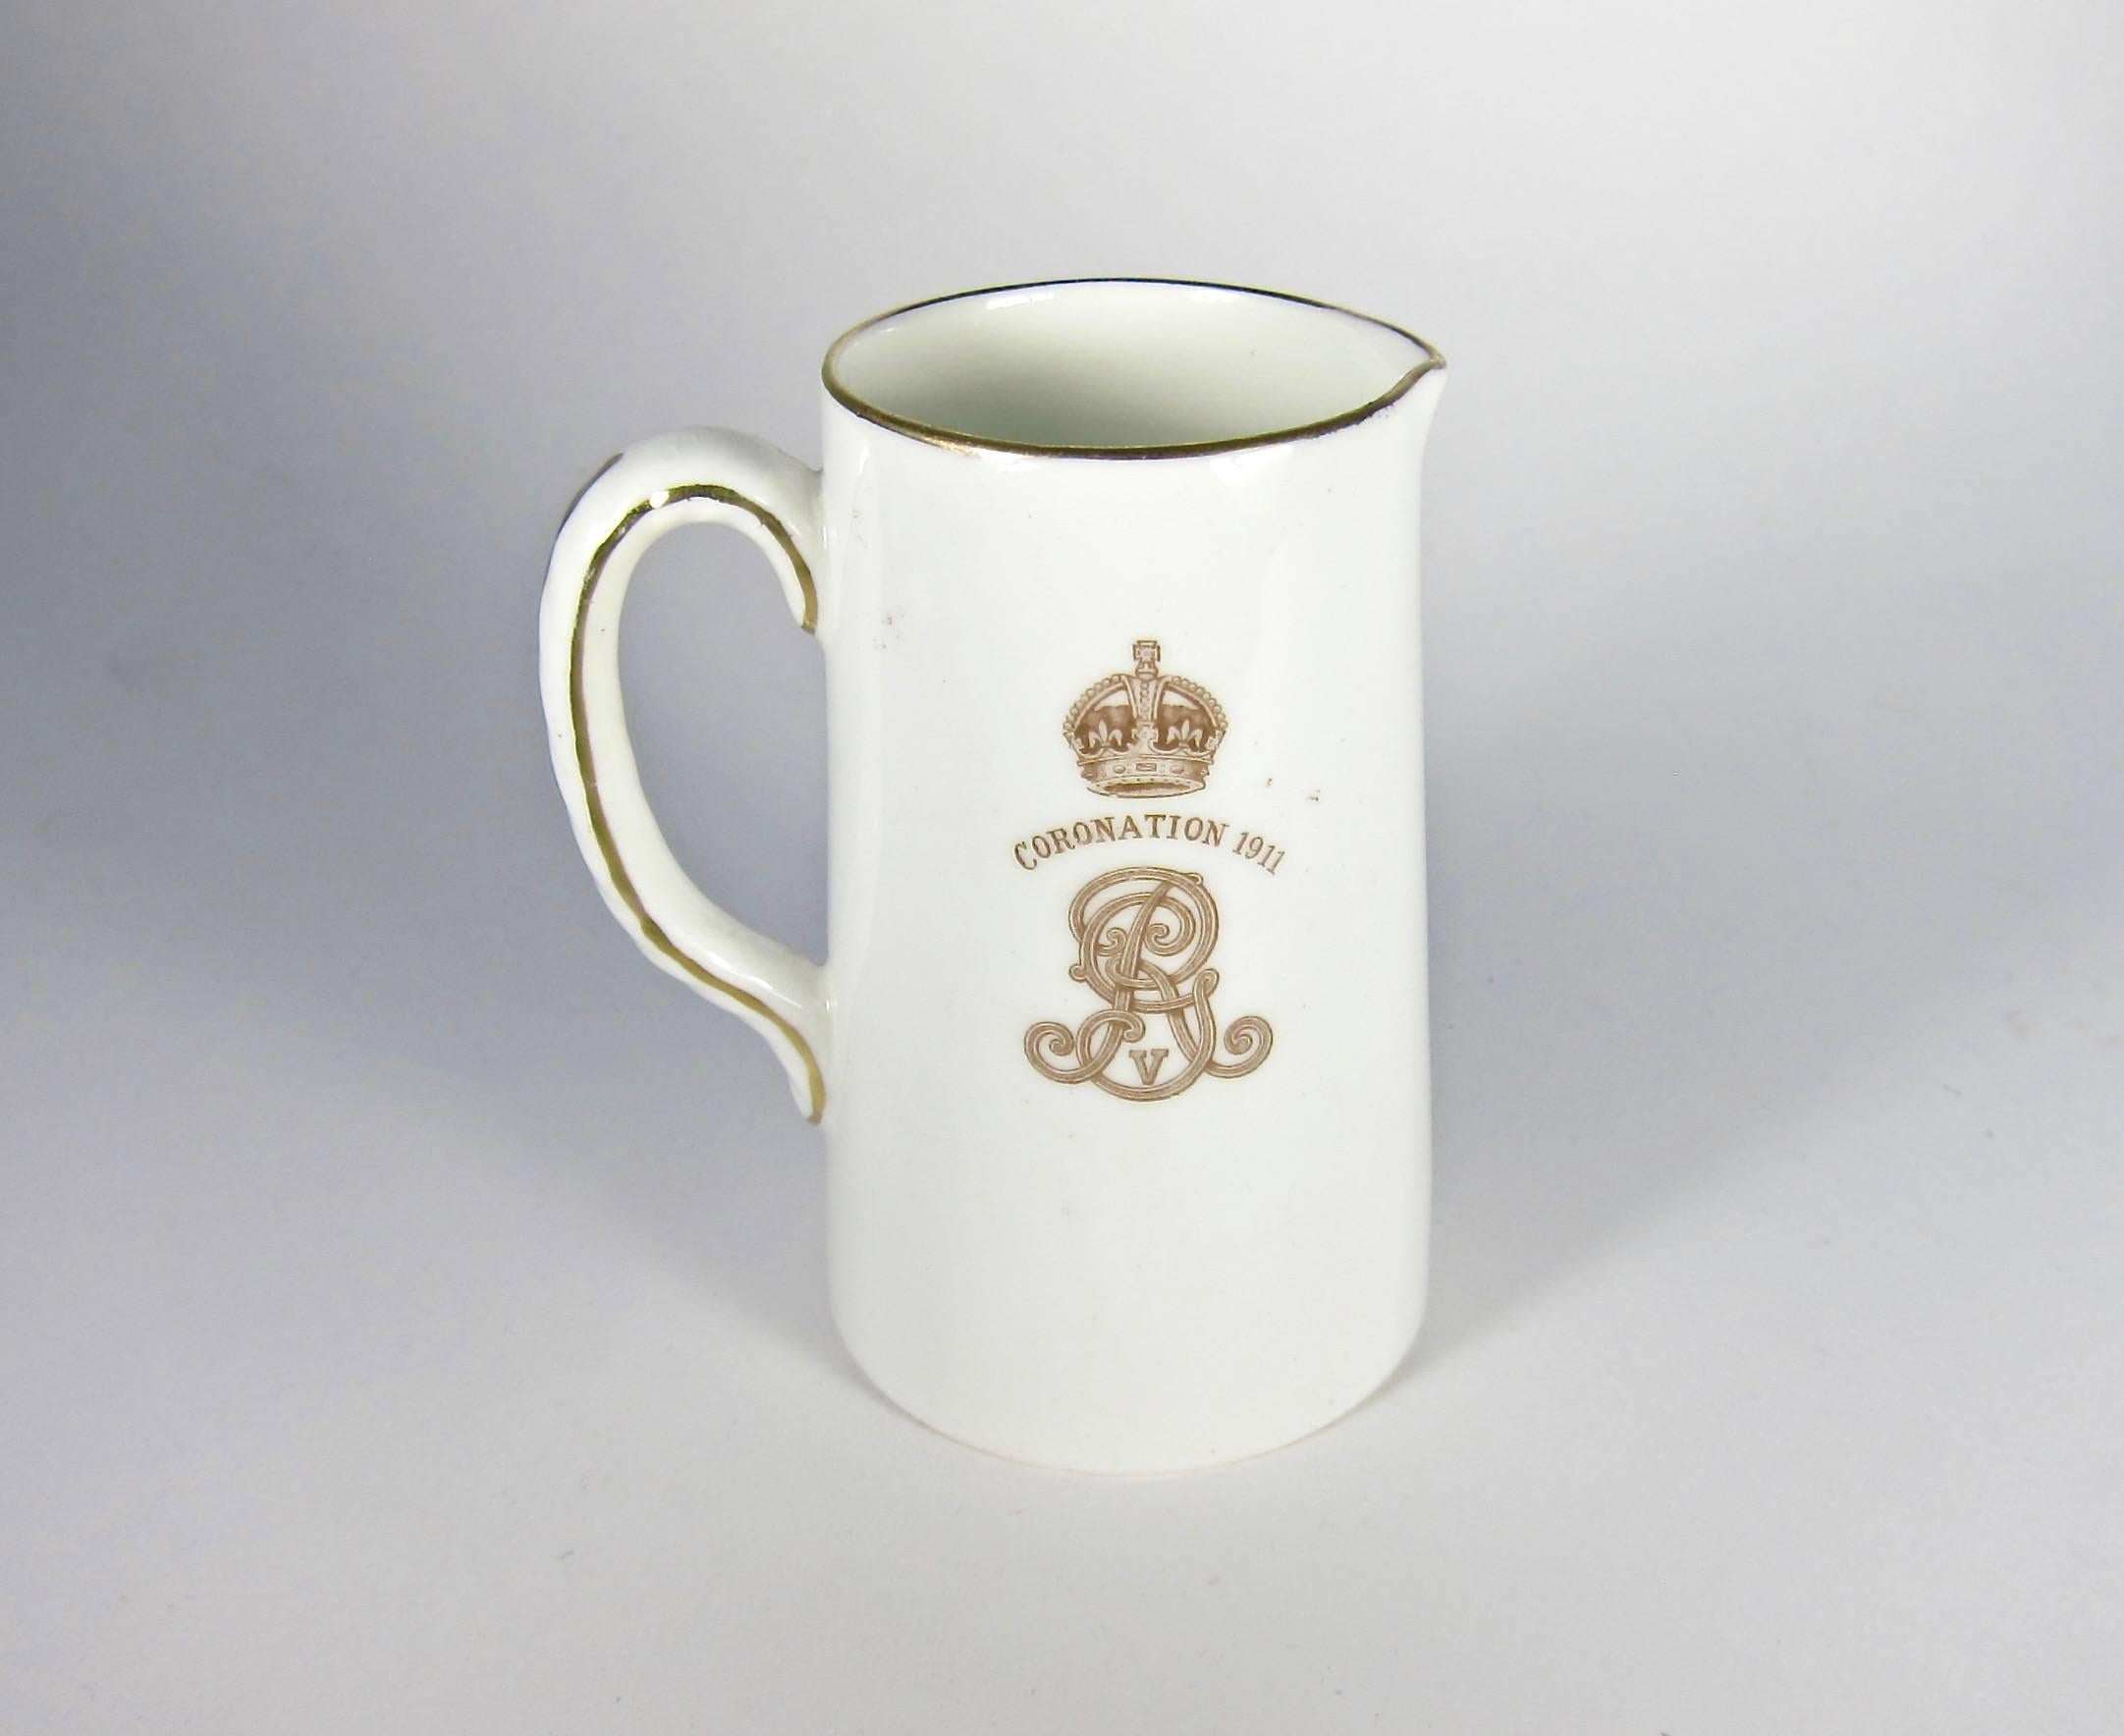 An English Royal Doulton antique ceramic pitcher sized for milk or cream commemorating the 1911 coronation of King George V and Queen Mary. Decorated with a transfer printed double oval portrait of the King and Queen; reverse shows their entwined